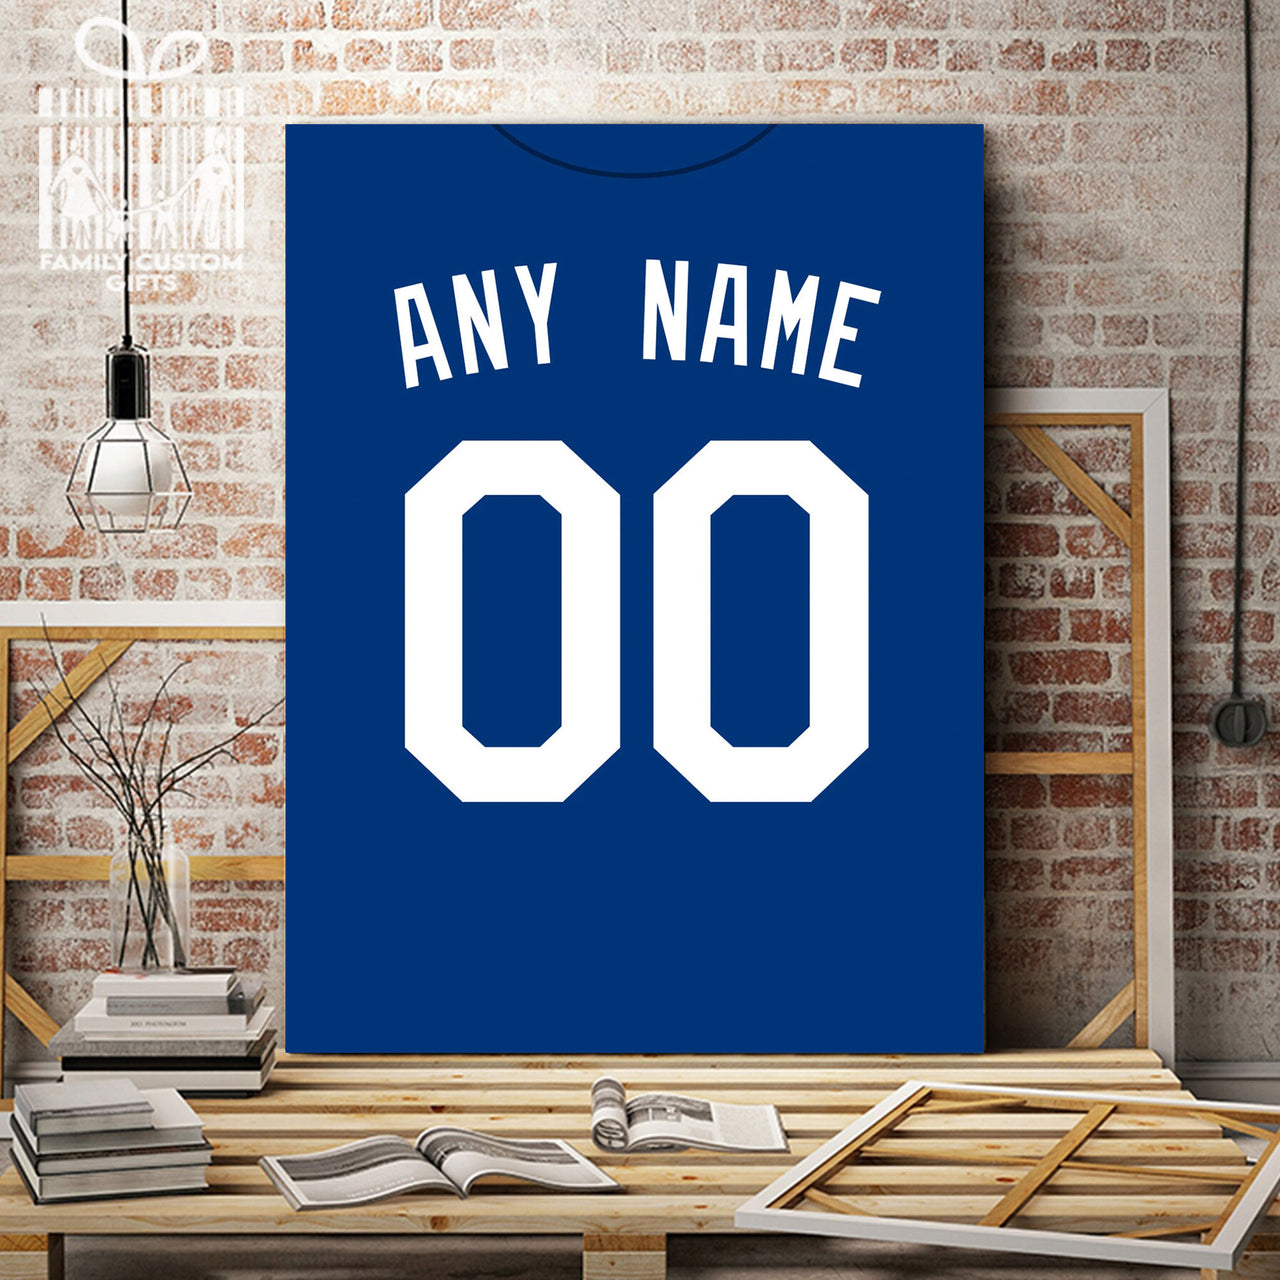 MLB Dodgers Here To Win White Design Personalized Baseball Jersey